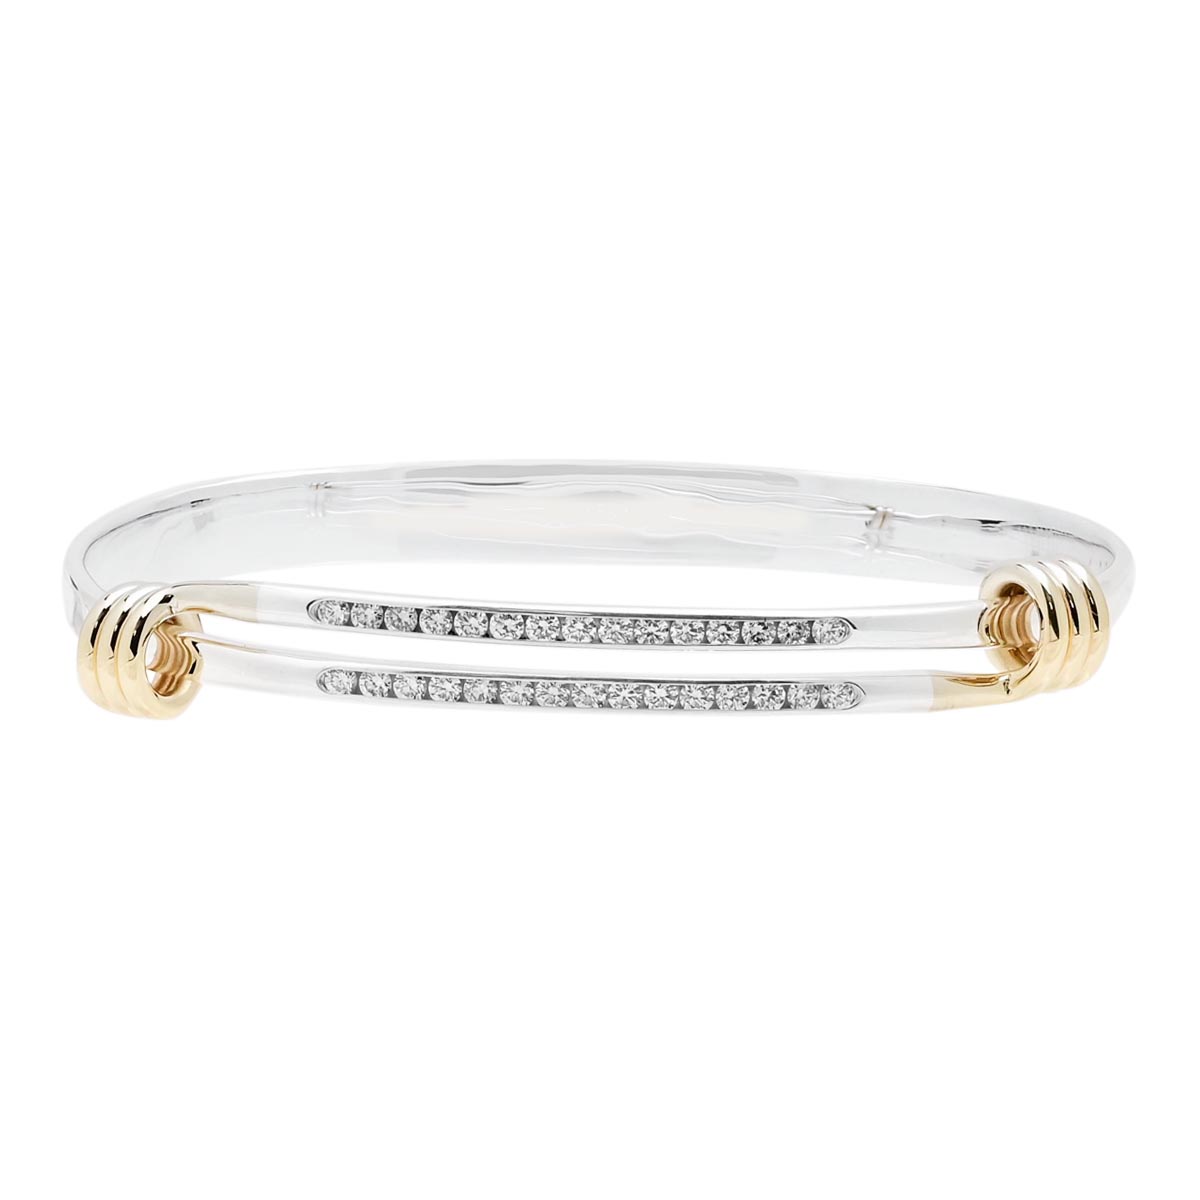 E.L. Designs Signature Diamond Bracelet in Sterling Silver and 14kt Yellow Gold (5/8ct tw)